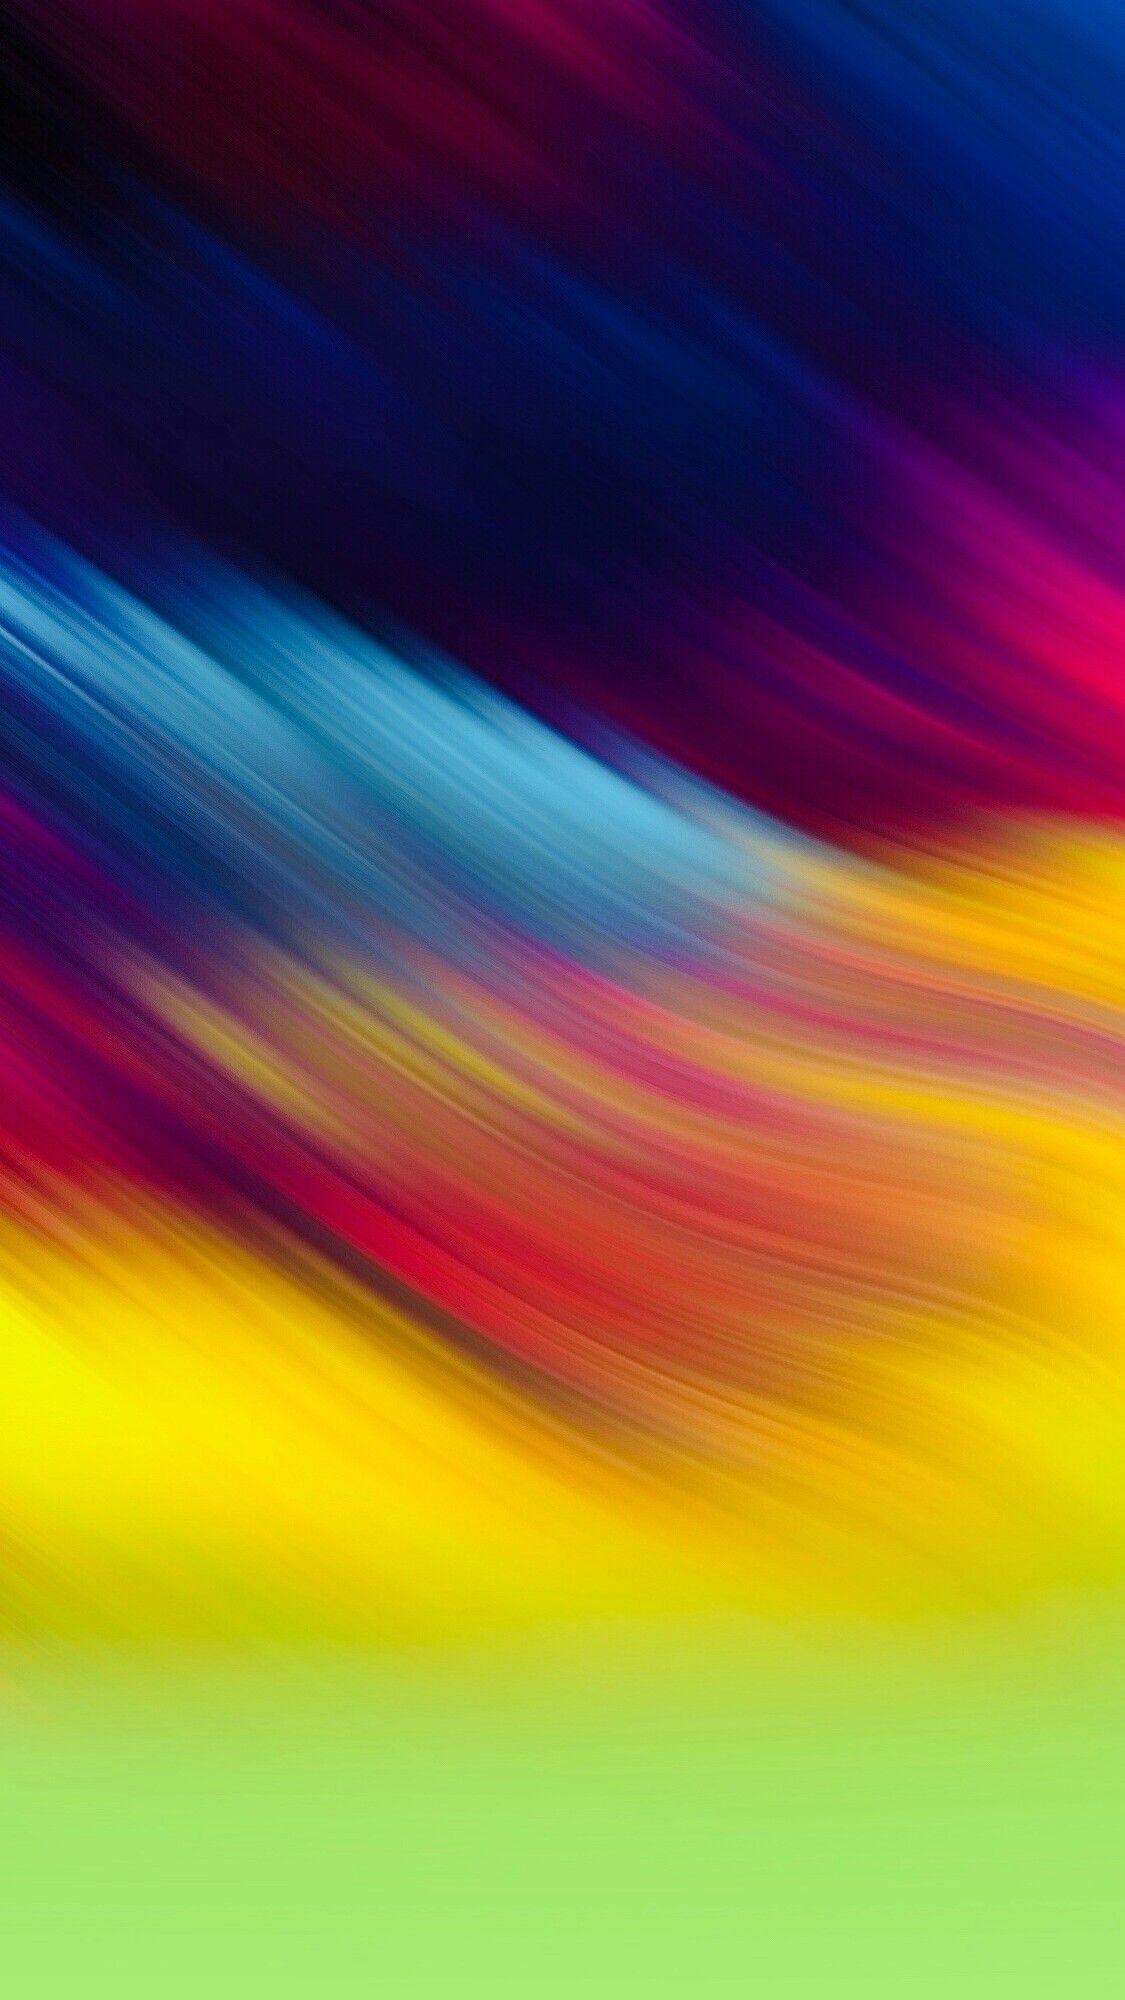 Curve Streak Iphone Wallpapers Awesome Multi Color Wallpapers